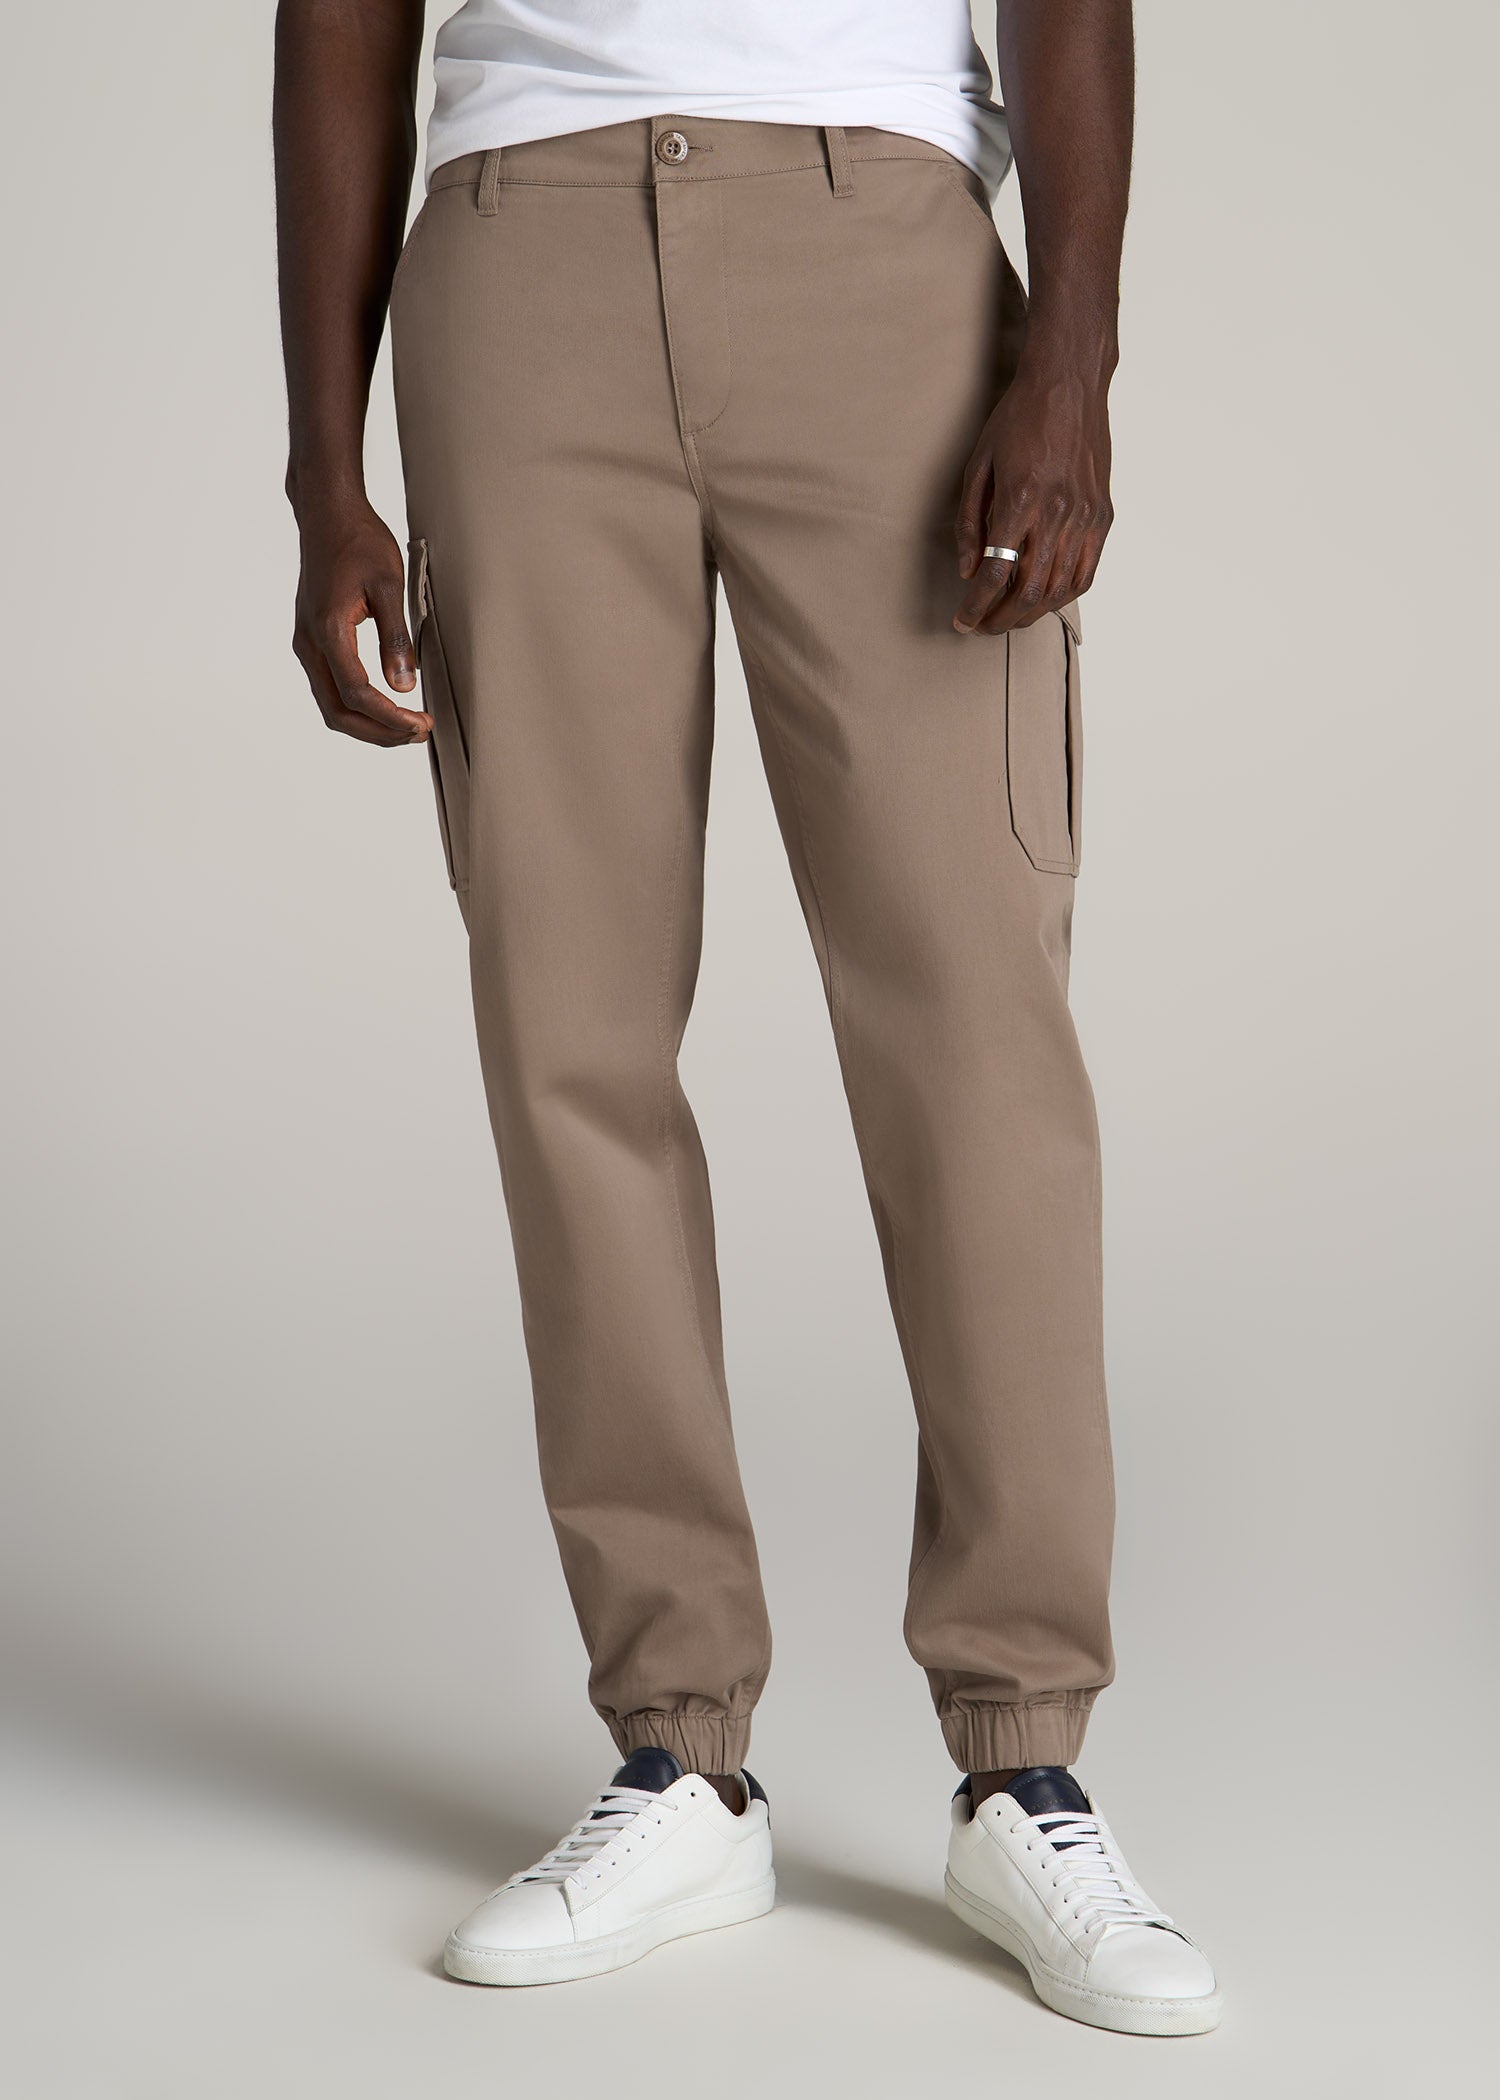 TAPERED-FIT Stretch Cotton Cargo Jogger Pants for Tall Men in Dark Sand